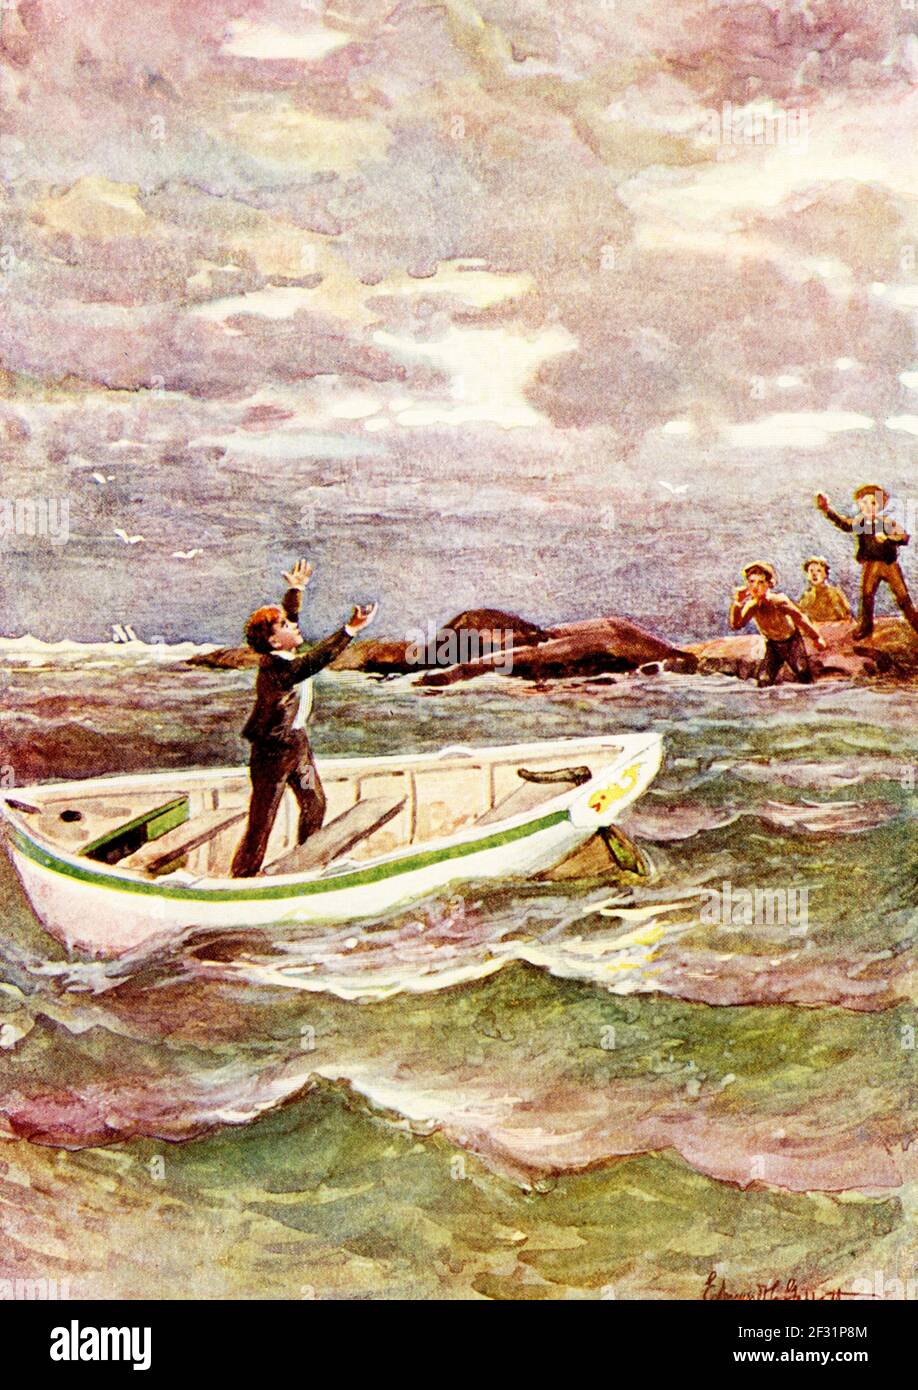 The caption for this 1902 image is: Drifting out to Sea. It is from The Cruise of the Dolphin, from The Story of a Bad Boy by Thomas Bailey Aldrich, with Tom the hero of tale. The Story of a Bad Boy is a semi-autobiographical novel published in 1869 by American writer Aldrich, fictionalizing his experiences as a boy in Portsmouth, New Hampshire. Stock Photo